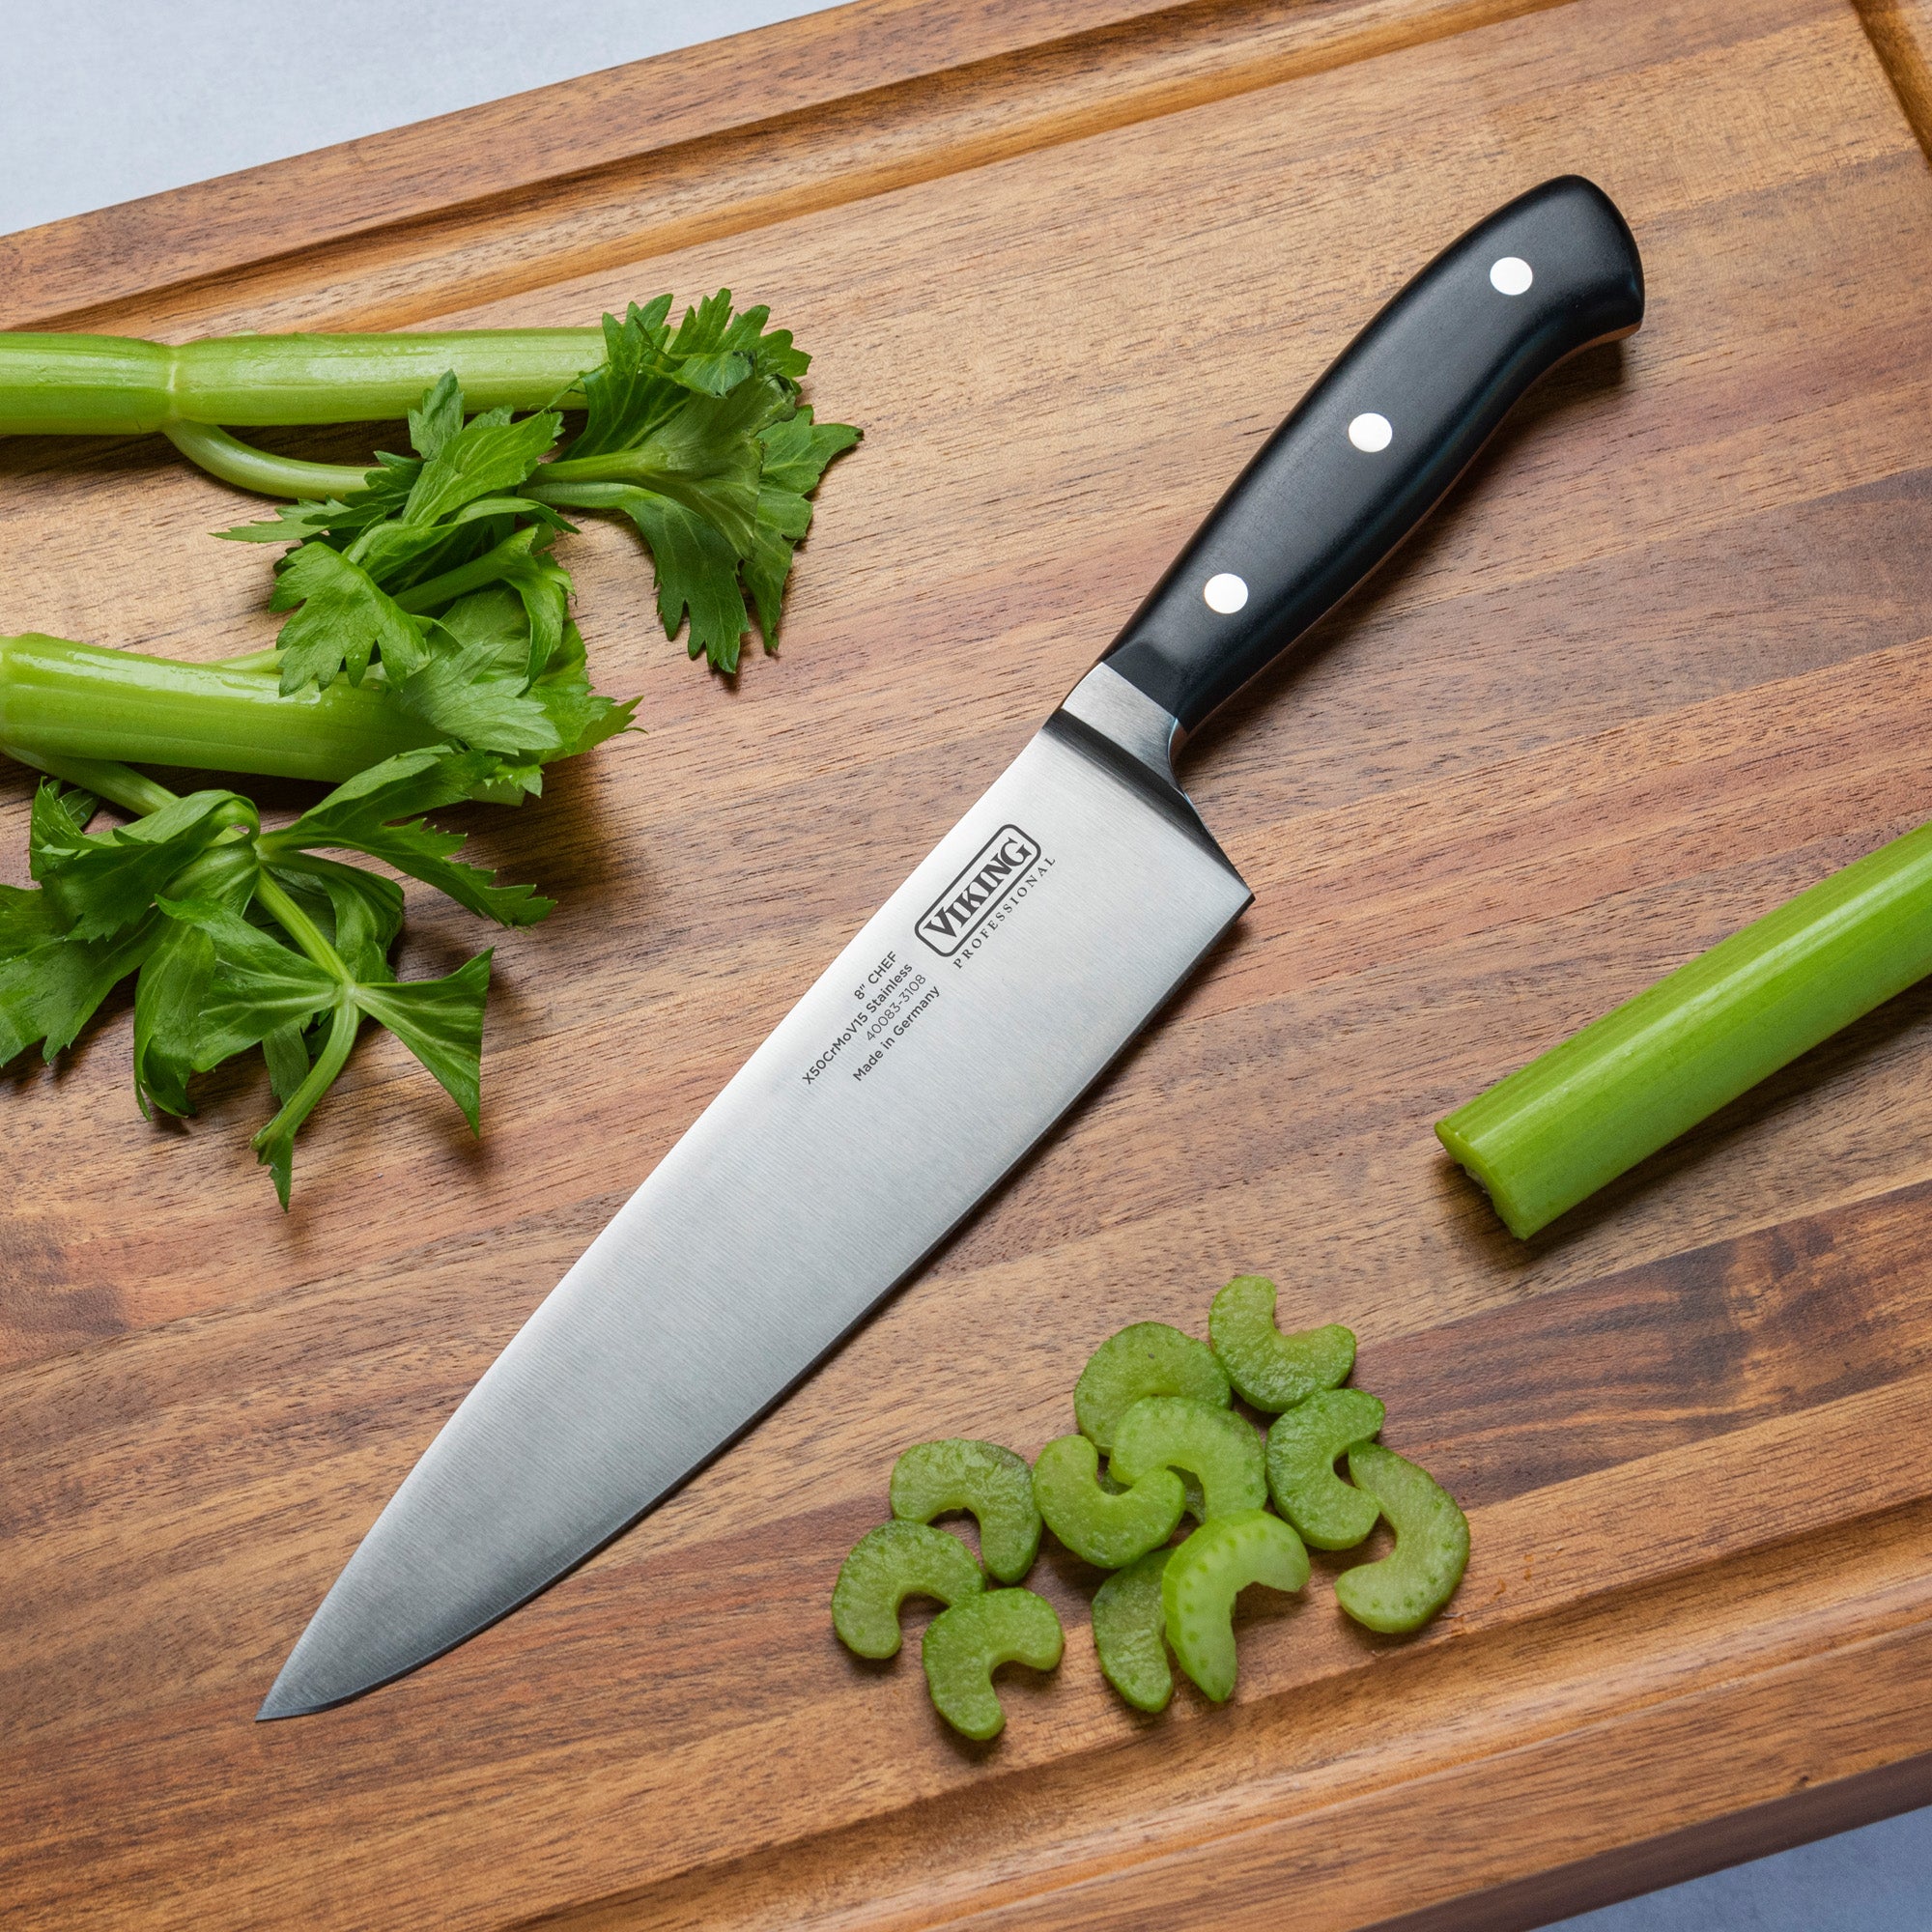 8 Chef Knife, Professional Stainless Steel Kitchen Cooking Knife